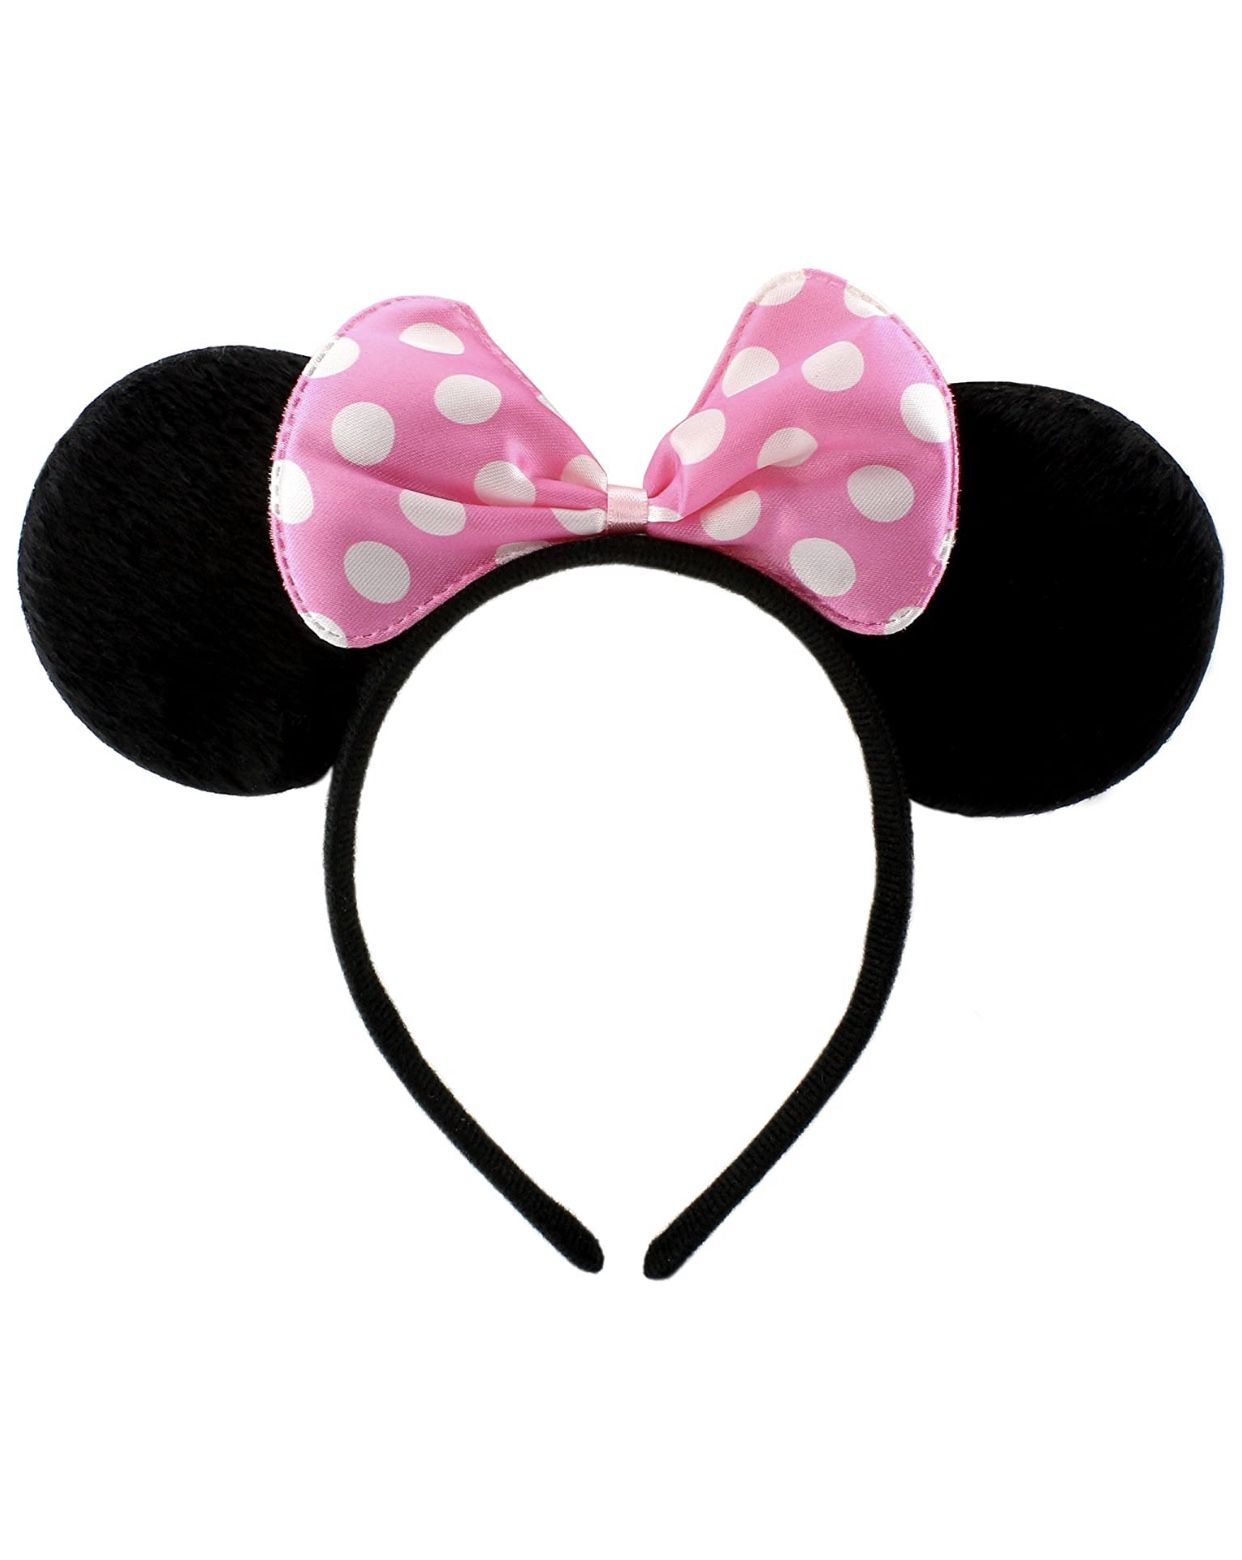 Black Mouse Ear Headbands w/Pink Bows Polka Dot Minnie Style Party Favors